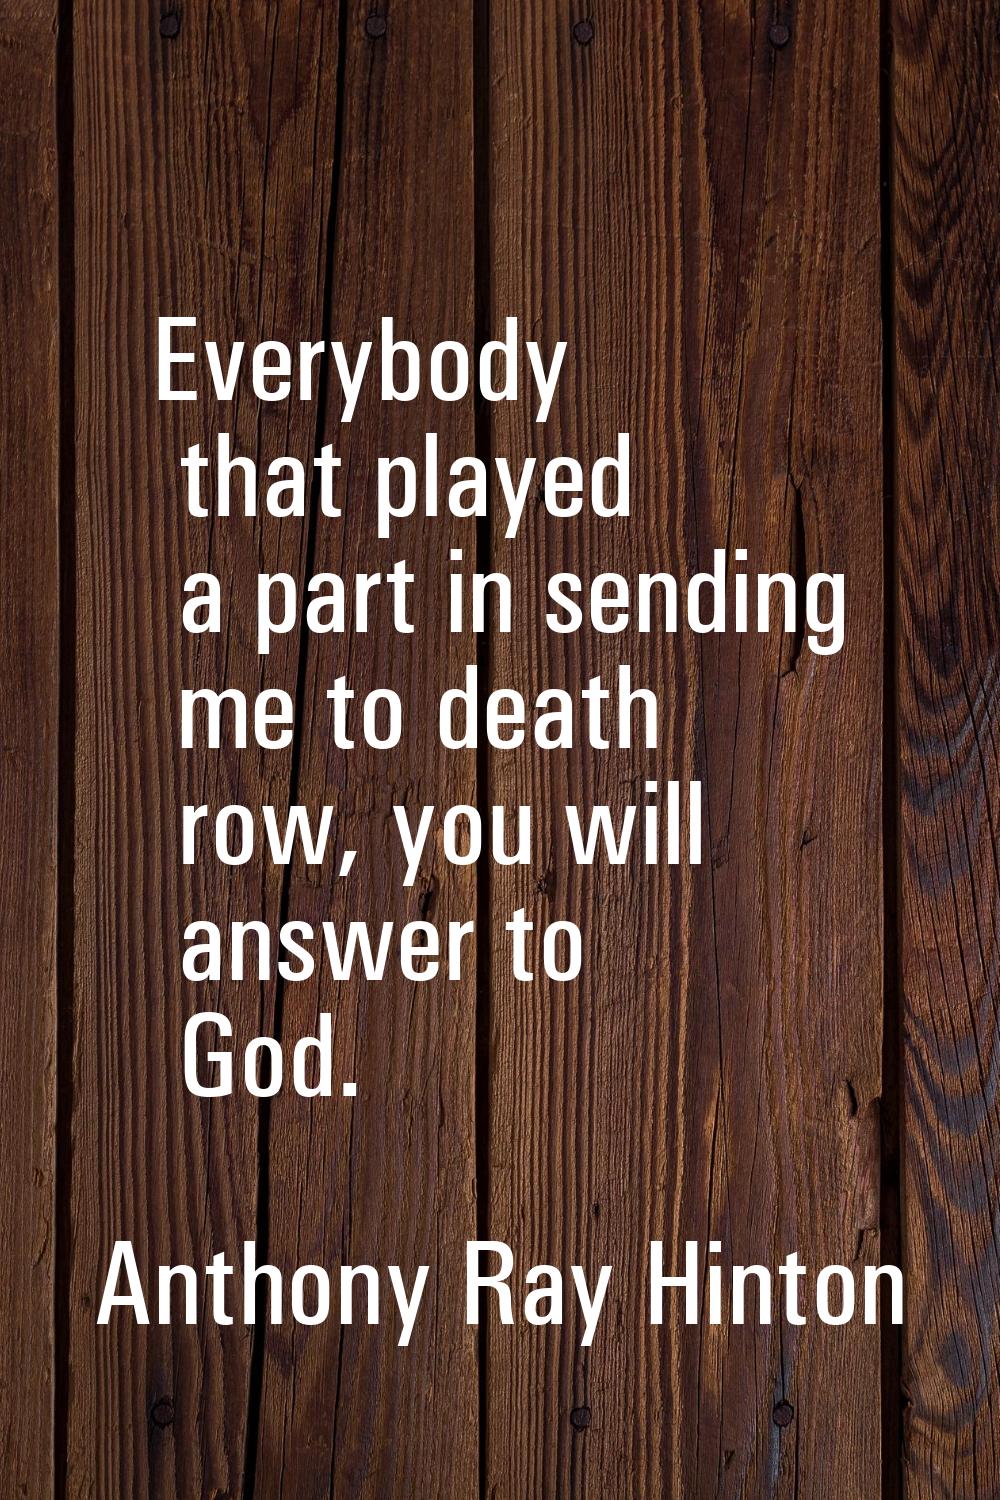 Everybody that played a part in sending me to death row, you will answer to God.